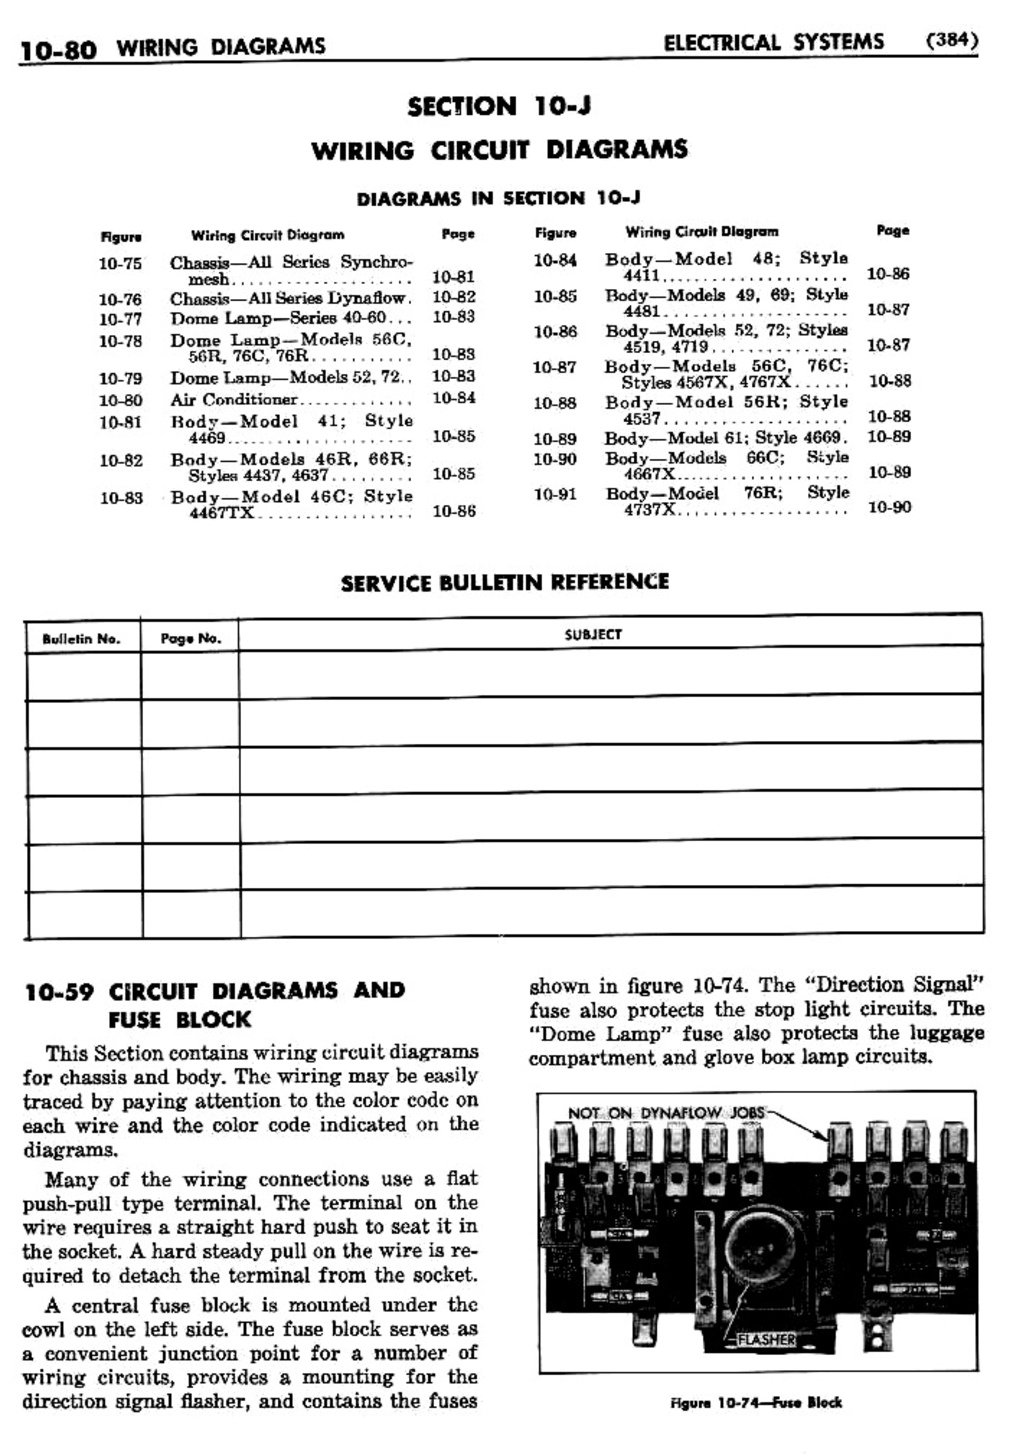 n_11 1955 Buick Shop Manual - Electrical Systems-080-080.jpg